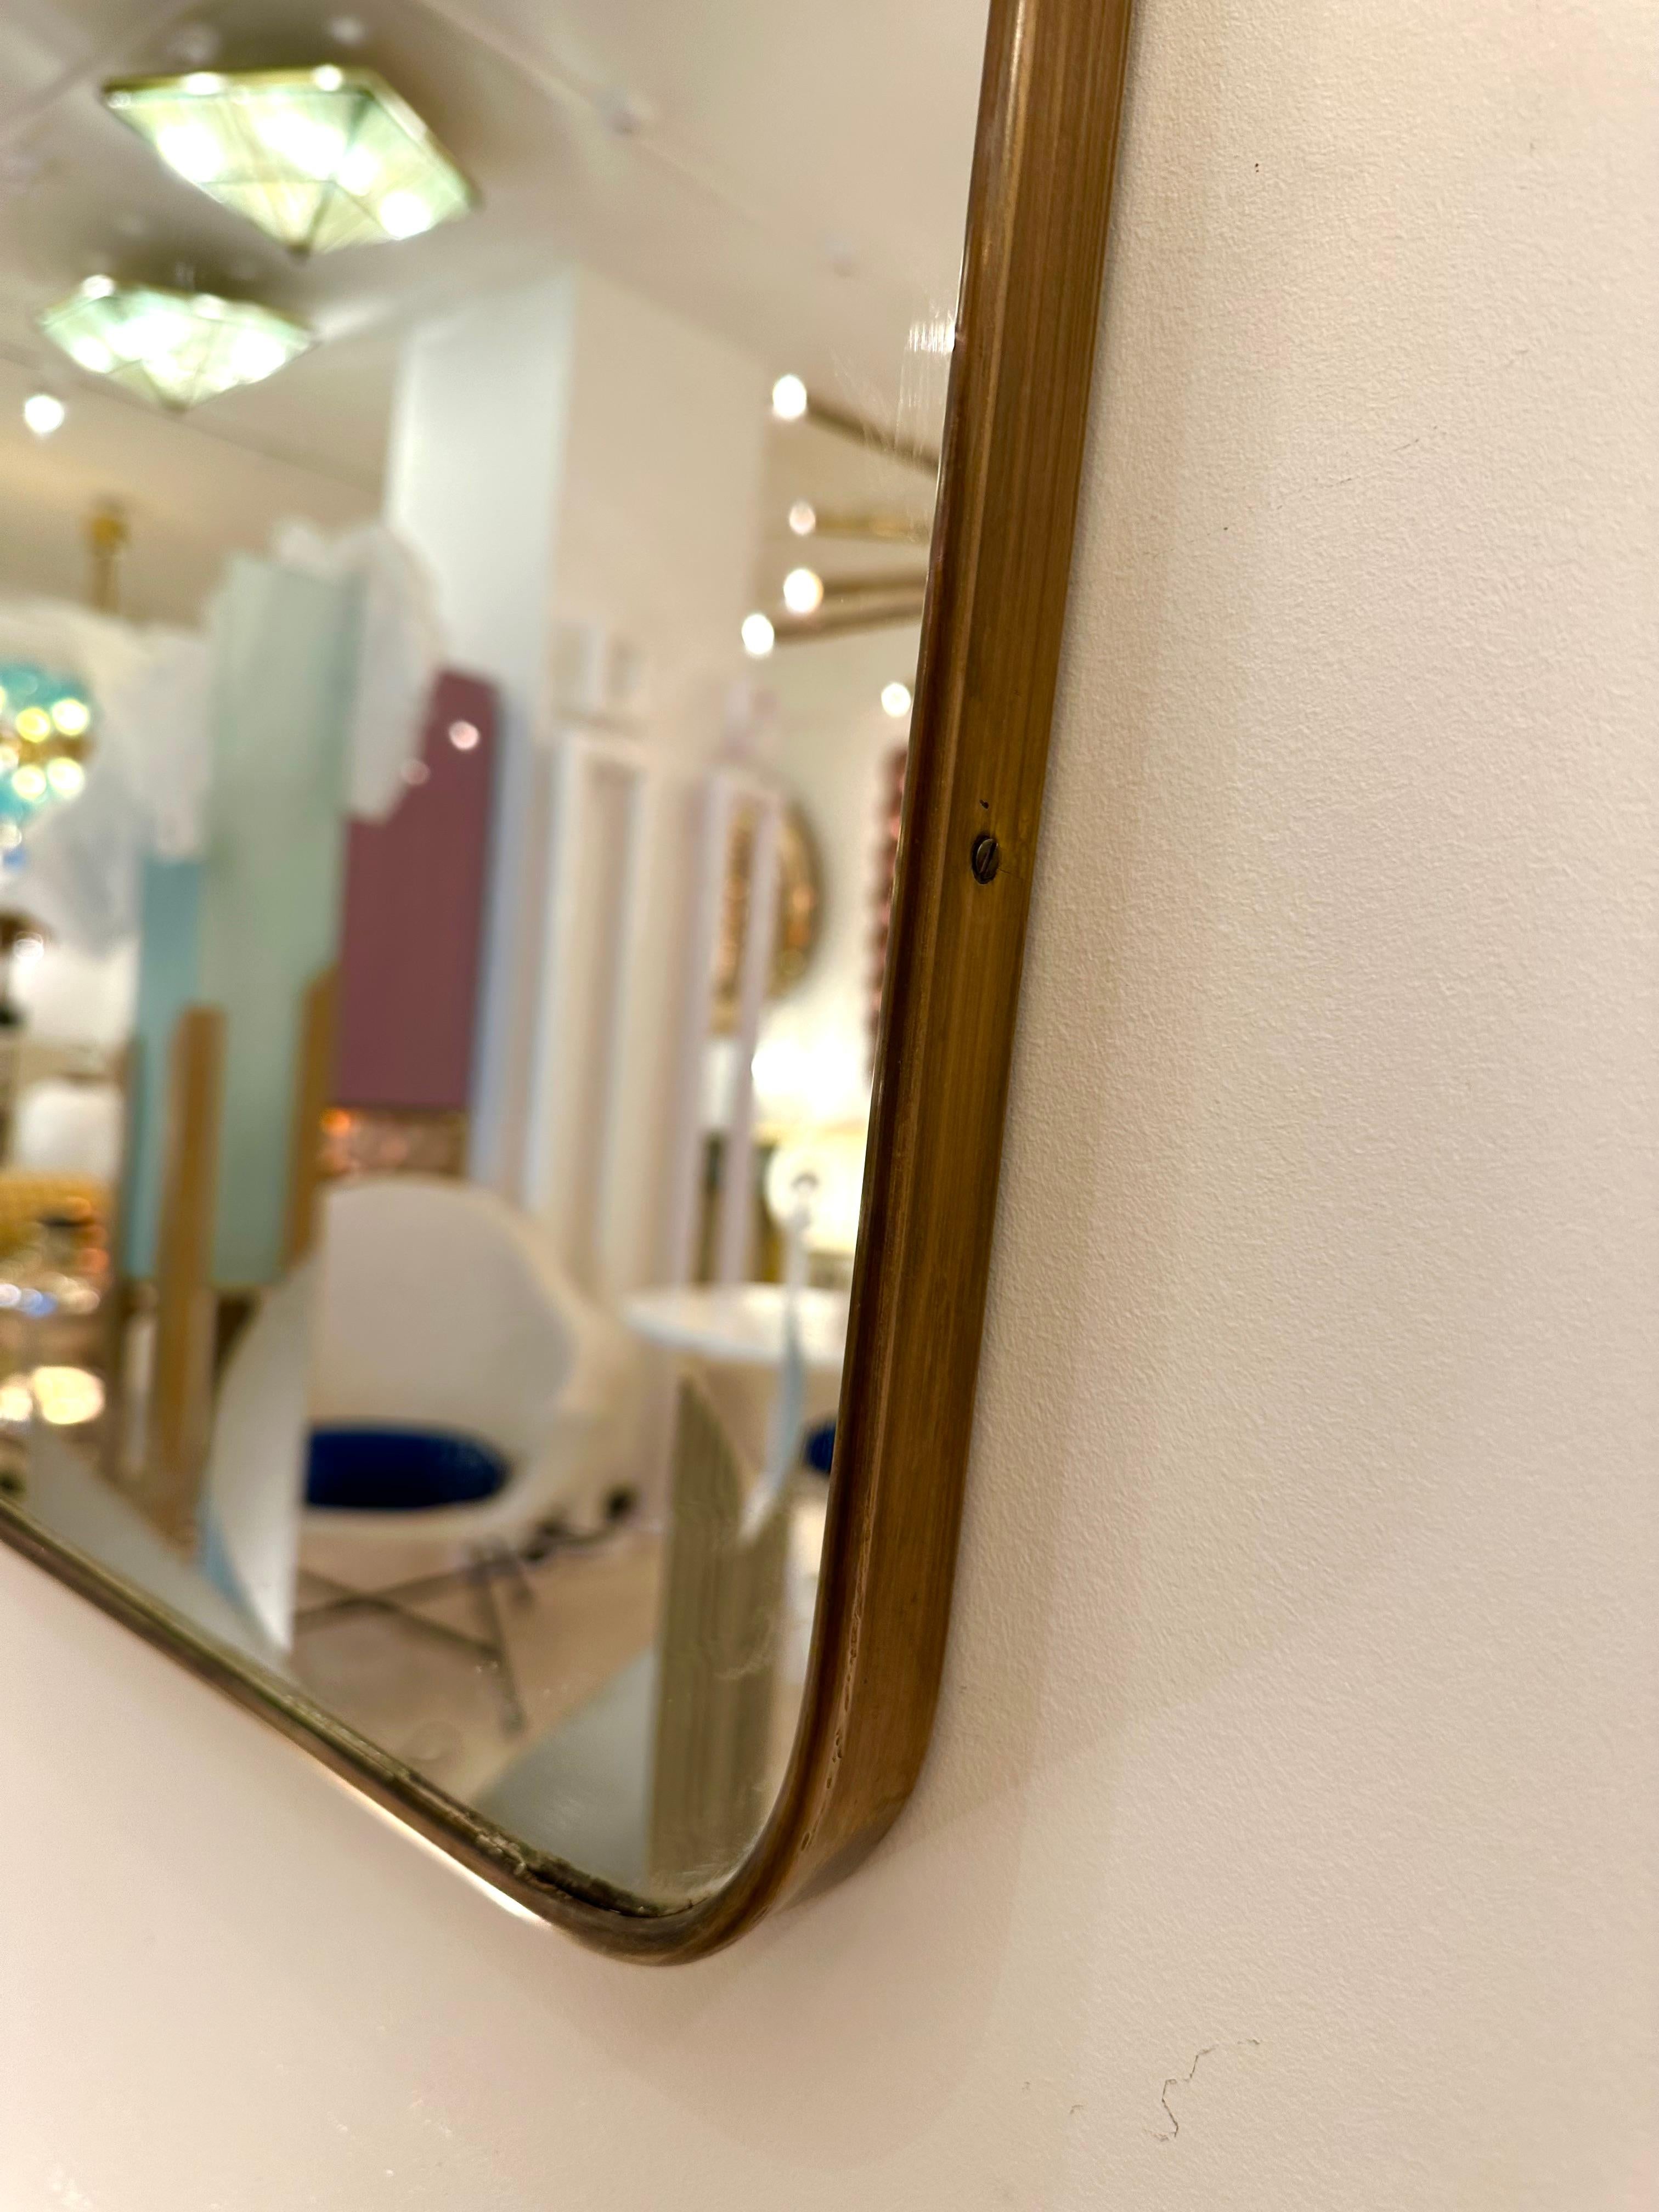 Mid-Century modern rectangle brass frame mirror. Nice patina. Gio Ponti placed this style of mirror in his interiors during the 1950s and 1960s.

Price listed by mirror. In sale separately.
For the pair set or 2 please indicate quantity X2 at